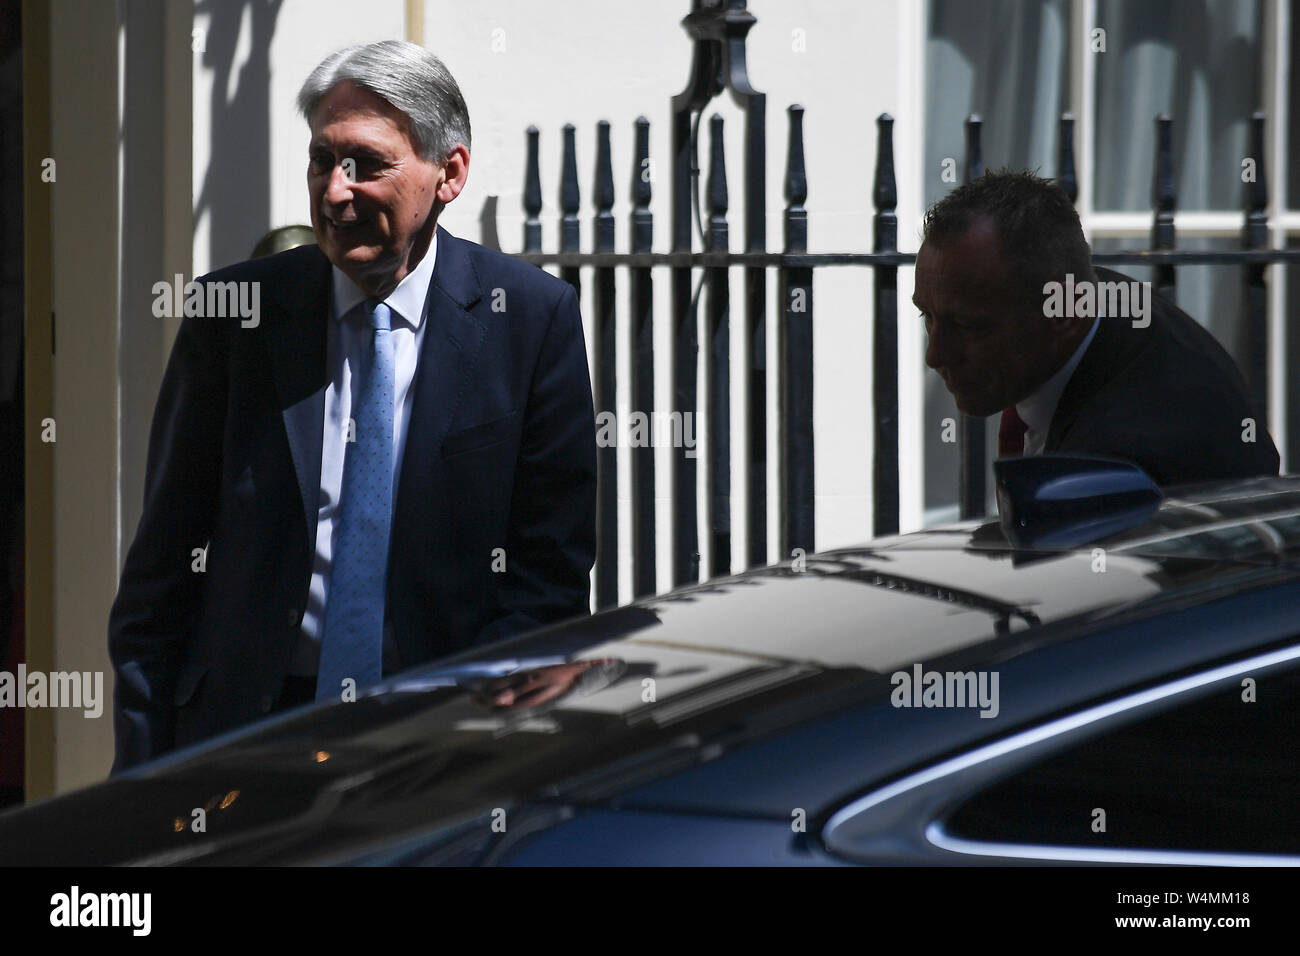 (190724) -- LONDON, July 24, 2019 (Xinhua) -- British Chancellor of the Exchequer Philip Hammond leaves 11 Downing Street in London, Britain on July 24, 2019. (Photo by Alberto Pezzali/Xinhua) Stock Photo